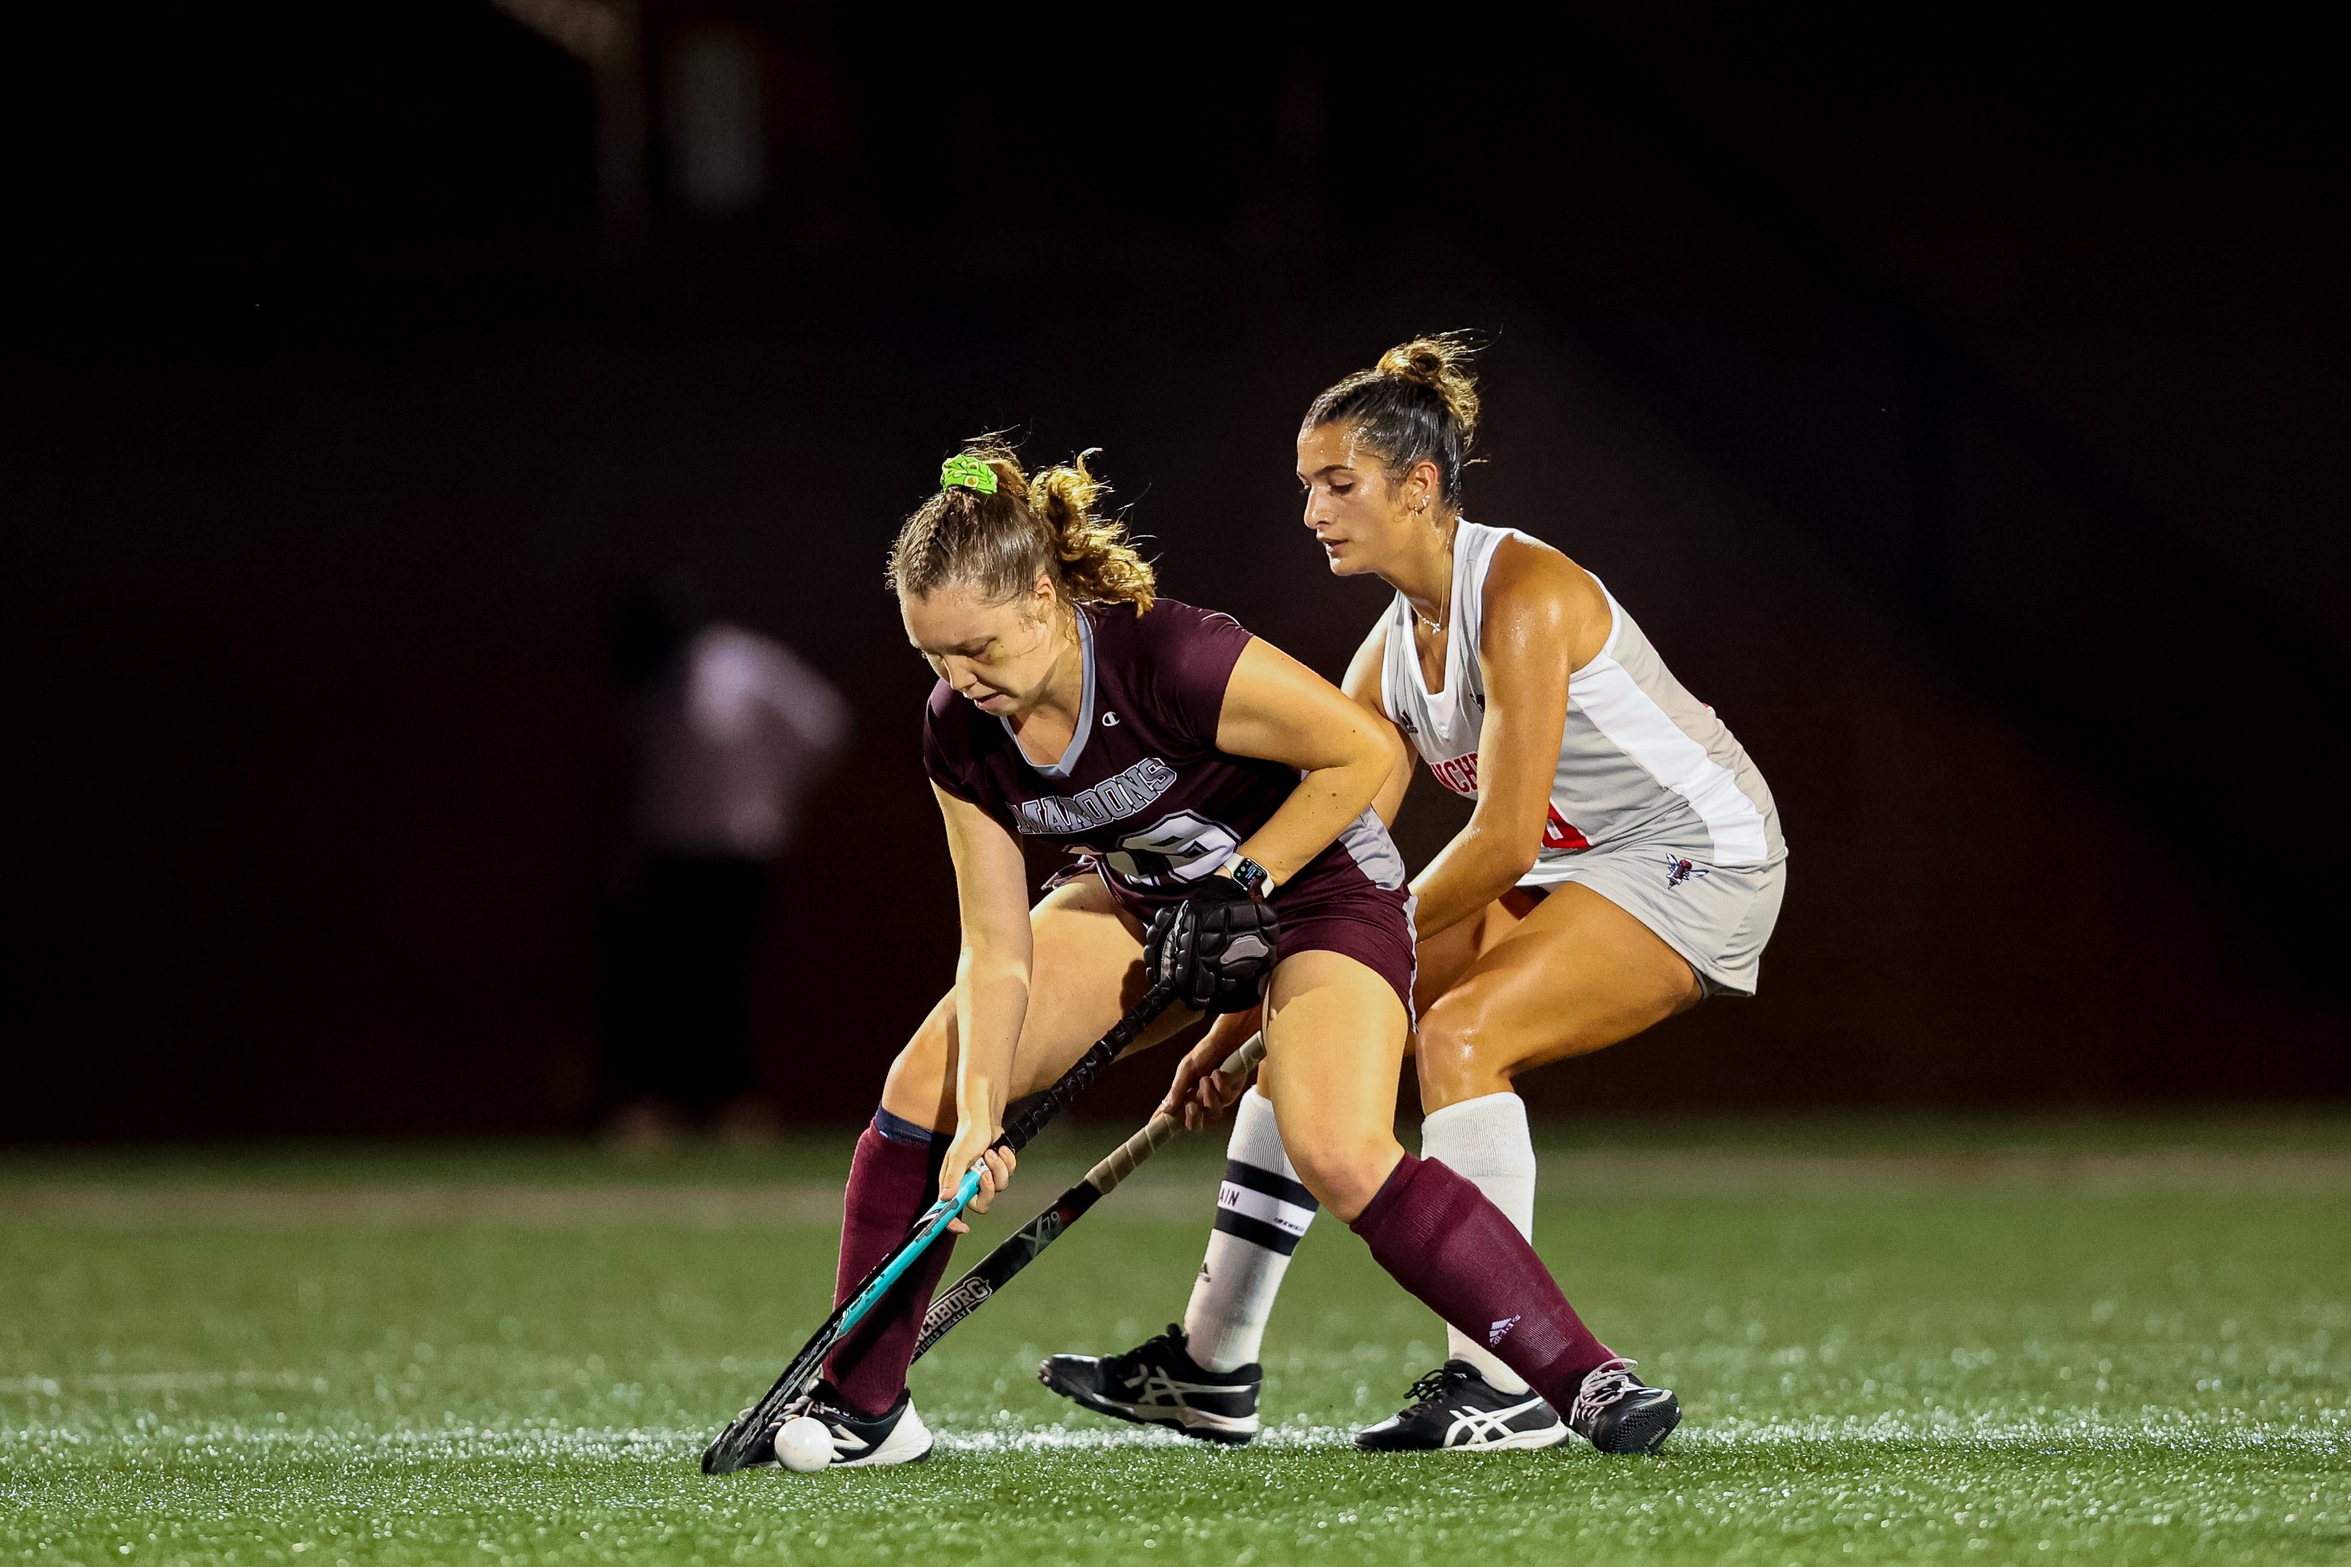 Maroons Set School Record for Consecutive Shutout Wins With 2-0 Victory Over Sweet Briar